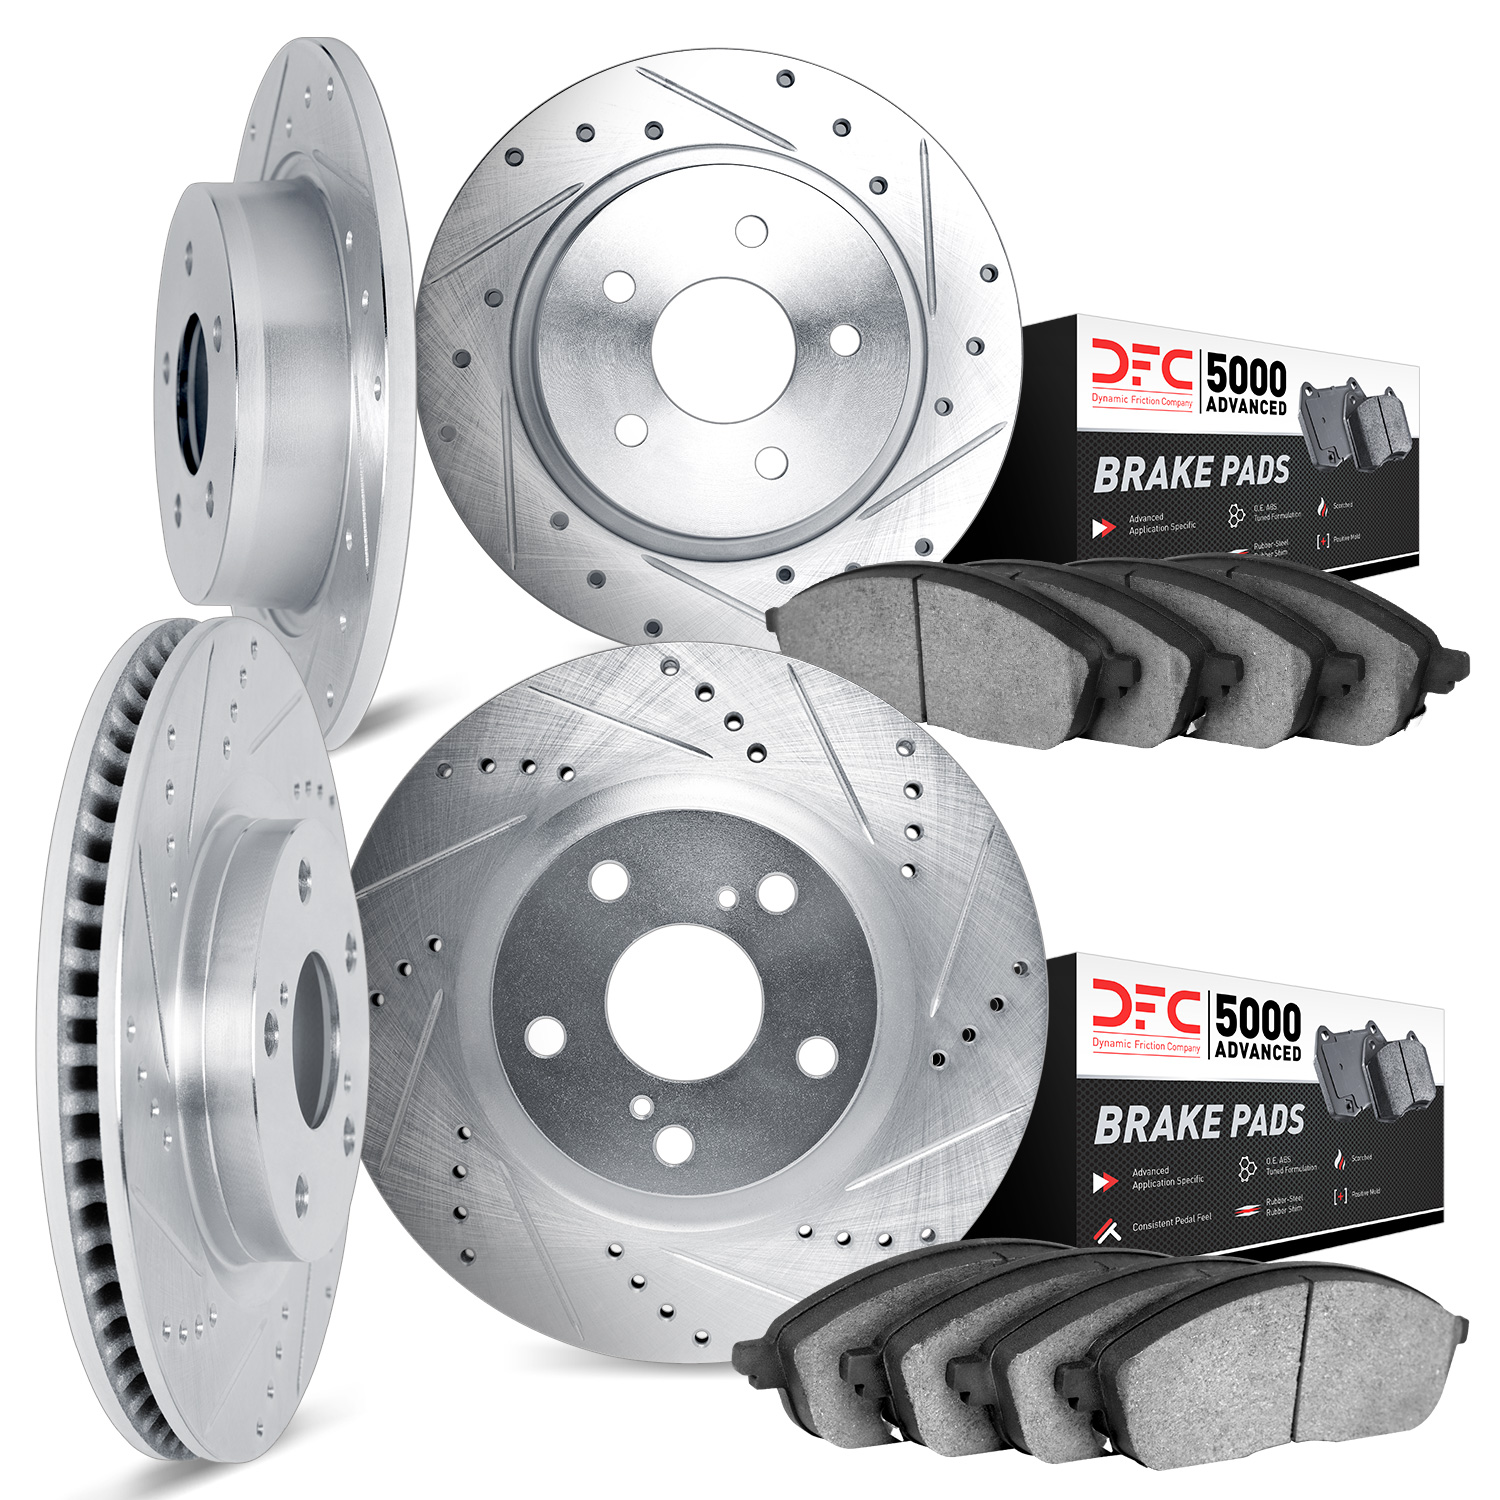 7504-54344 Drilled/Slotted Brake Rotors w/5000 Advanced Brake Pads Kit [Silver], 1997-2002 Ford/Lincoln/Mercury/Mazda, Position: